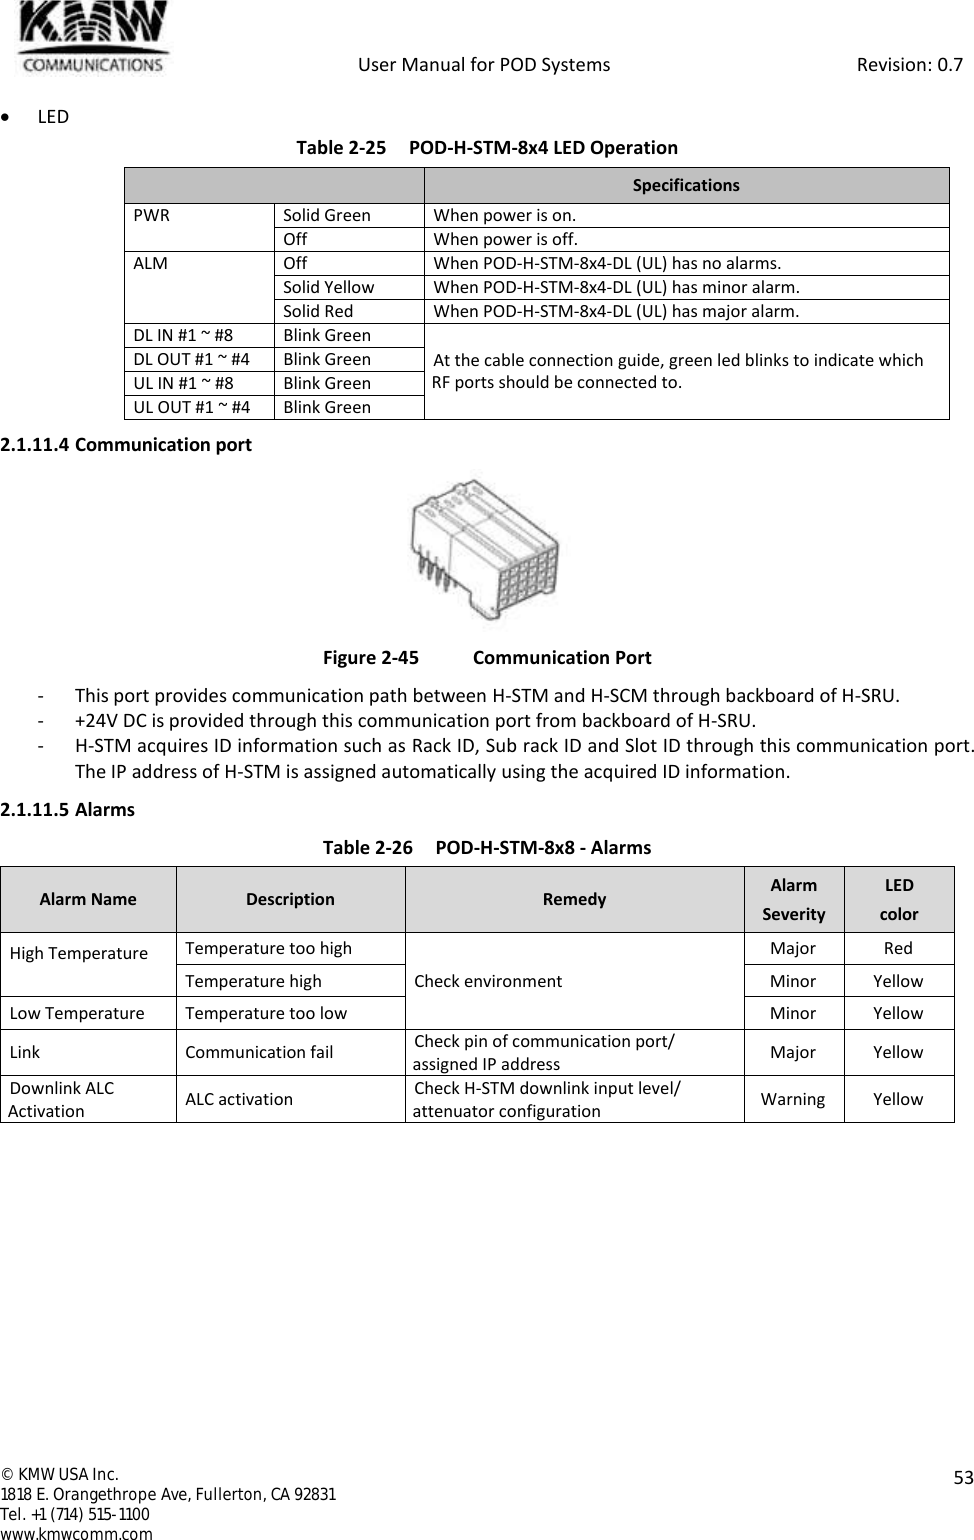            User Manual for POD Systems                                                     Revision: 0.7  ©  KMW USA Inc. 1818 E. Orangethrope Ave, Fullerton, CA 92831 Tel. +1 (714) 515-1100 www.kmwcomm.com  53   LED Table 2-25 POD-H-STM-8x4 LED Operation  Specifications PWR Solid Green When power is on. Off When power is off. ALM Off When POD-H-STM-8x4-DL (UL) has no alarms. Solid Yellow When POD-H-STM-8x4-DL (UL) has minor alarm. Solid Red When POD-H-STM-8x4-DL (UL) has major alarm. DL IN #1 ~ #8 Blink Green At the cable connection guide, green led blinks to indicate which RF ports should be connected to. DL OUT #1 ~ #4 Blink Green UL IN #1 ~ #8 Blink Green UL OUT #1 ~ #4 Blink Green 2.1.11.4 Communication port  Figure 2-45  Communication Port - This port provides communication path between H-STM and H-SCM through backboard of H-SRU. - +24V DC is provided through this communication port from backboard of H-SRU. - H-STM acquires ID information such as Rack ID, Sub rack ID and Slot ID through this communication port. The IP address of H-STM is assigned automatically using the acquired ID information. 2.1.11.5 Alarms Table 2-26 POD-H-STM-8x8 - Alarms Alarm Name Description Remedy Alarm Severity LED color High Temperature  Temperature too high Check environment Major Red Temperature high Minor Yellow Low Temperature Temperature too low Minor Yellow Link Communication fail Check pin of communication port/ assigned IP address Major Yellow Downlink ALC Activation ALC activation Check H-STM downlink input level/ attenuator configuration Warning Yellow   